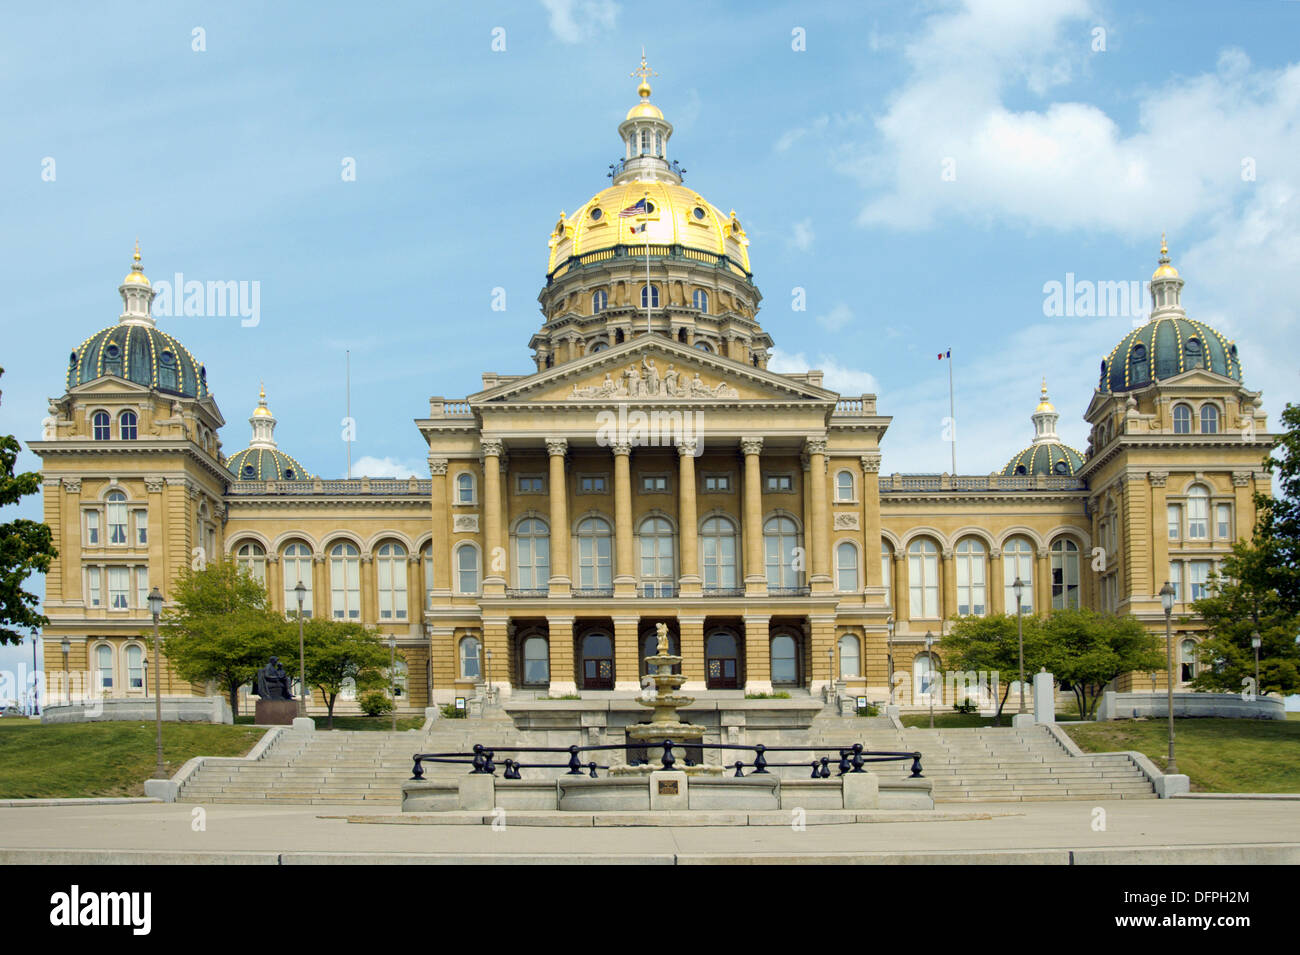 Iowa State Capital Builidng In Des Moines Iowa Usa Stock Photo Alamy